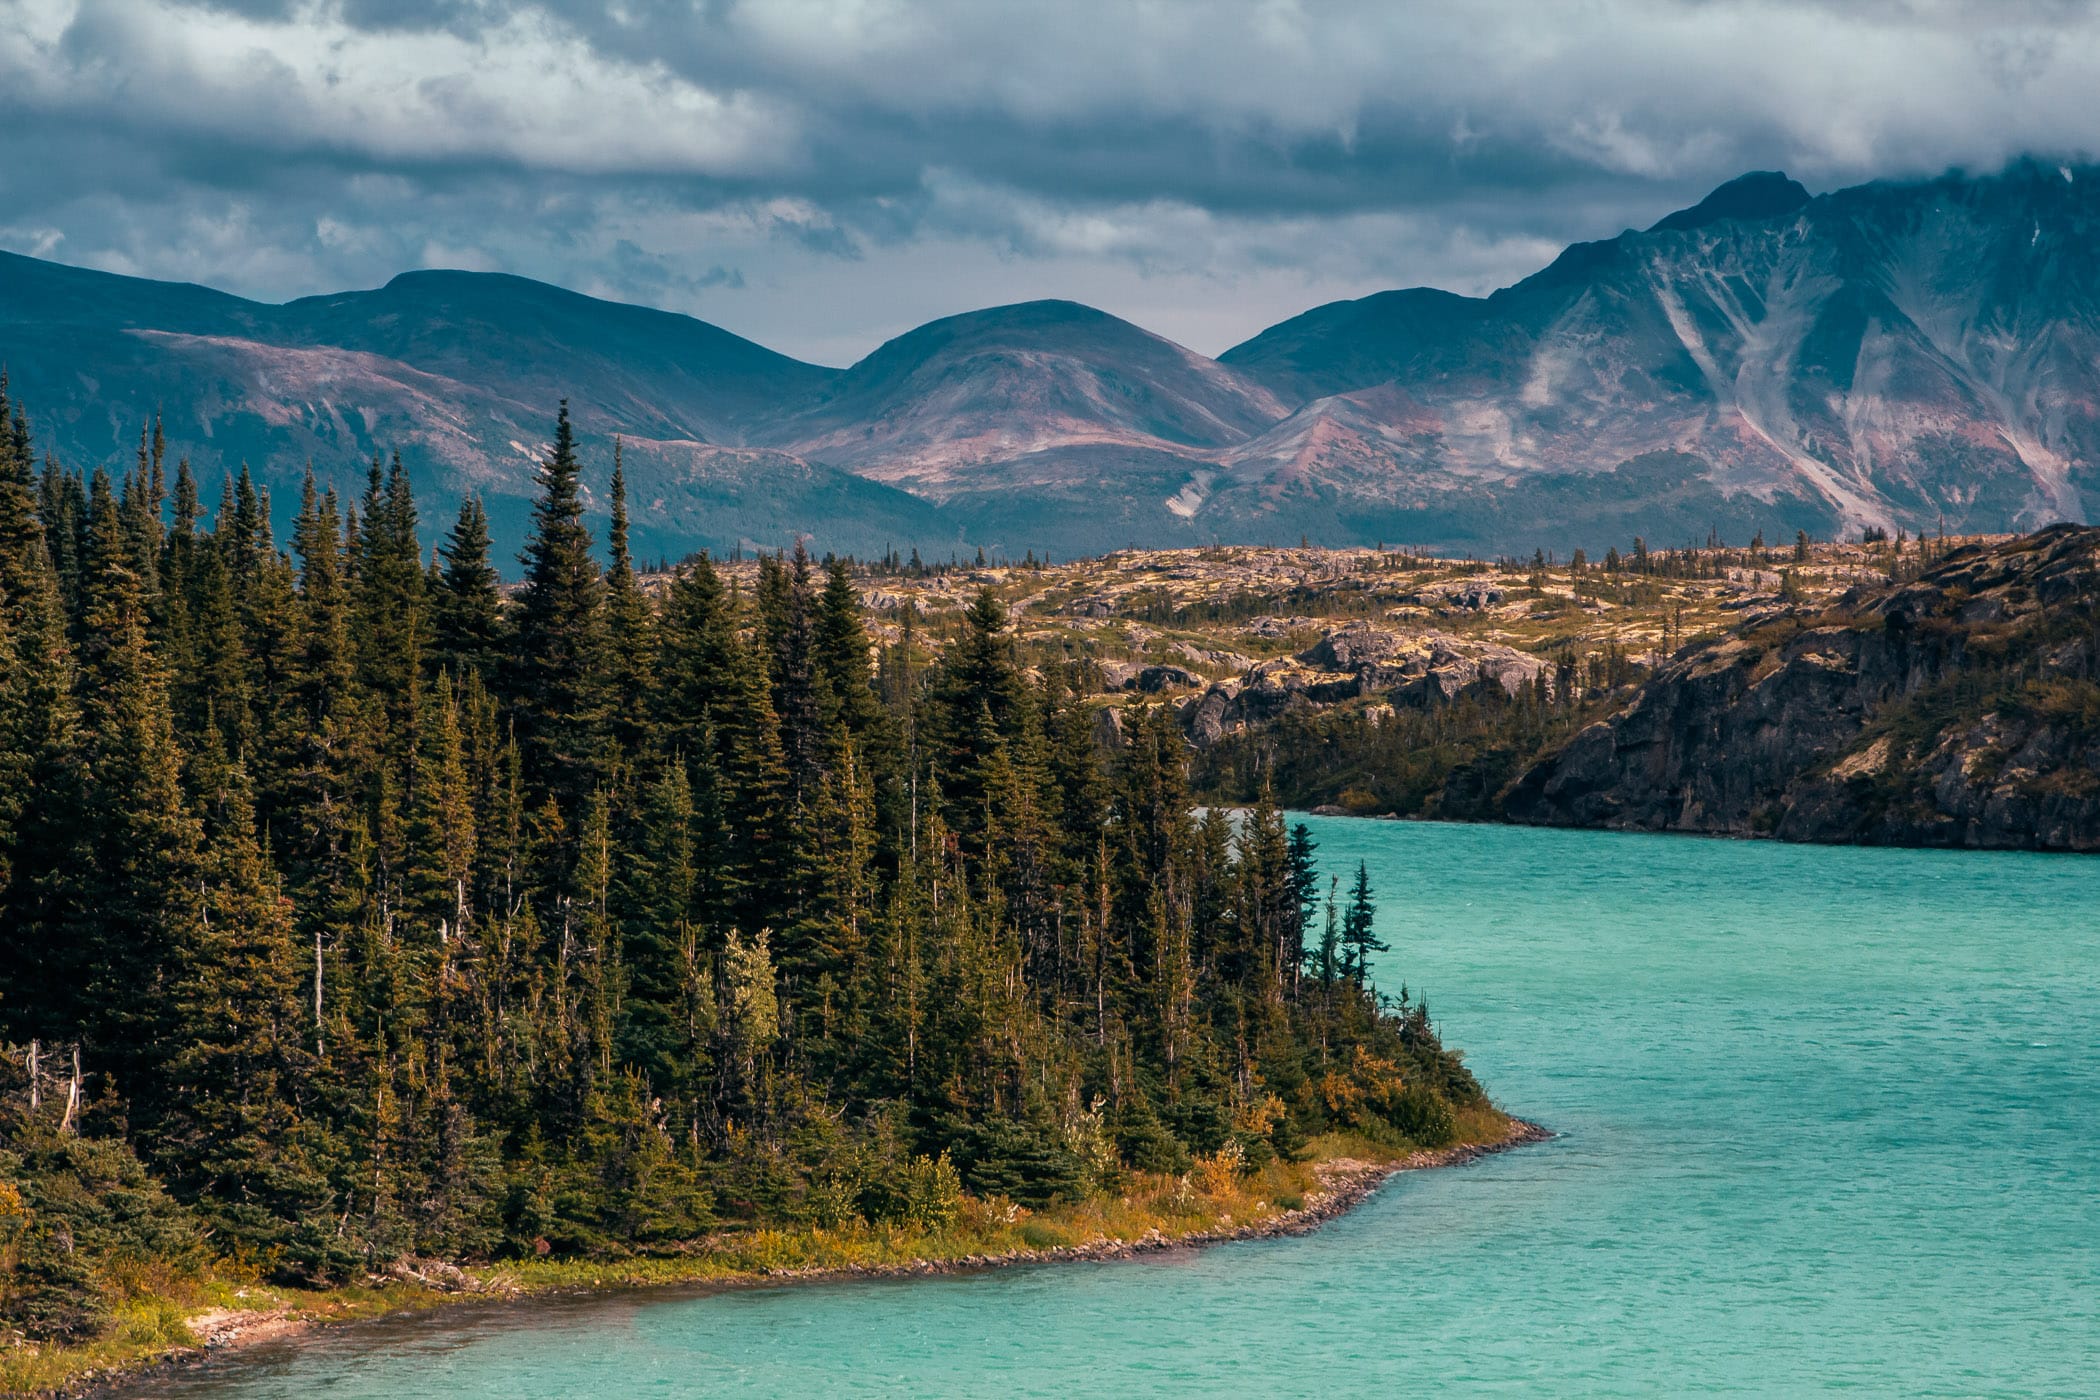 British Columbia's Bernard Lake, surrounded by towering pine trees and mountains along the Klondike Highway.